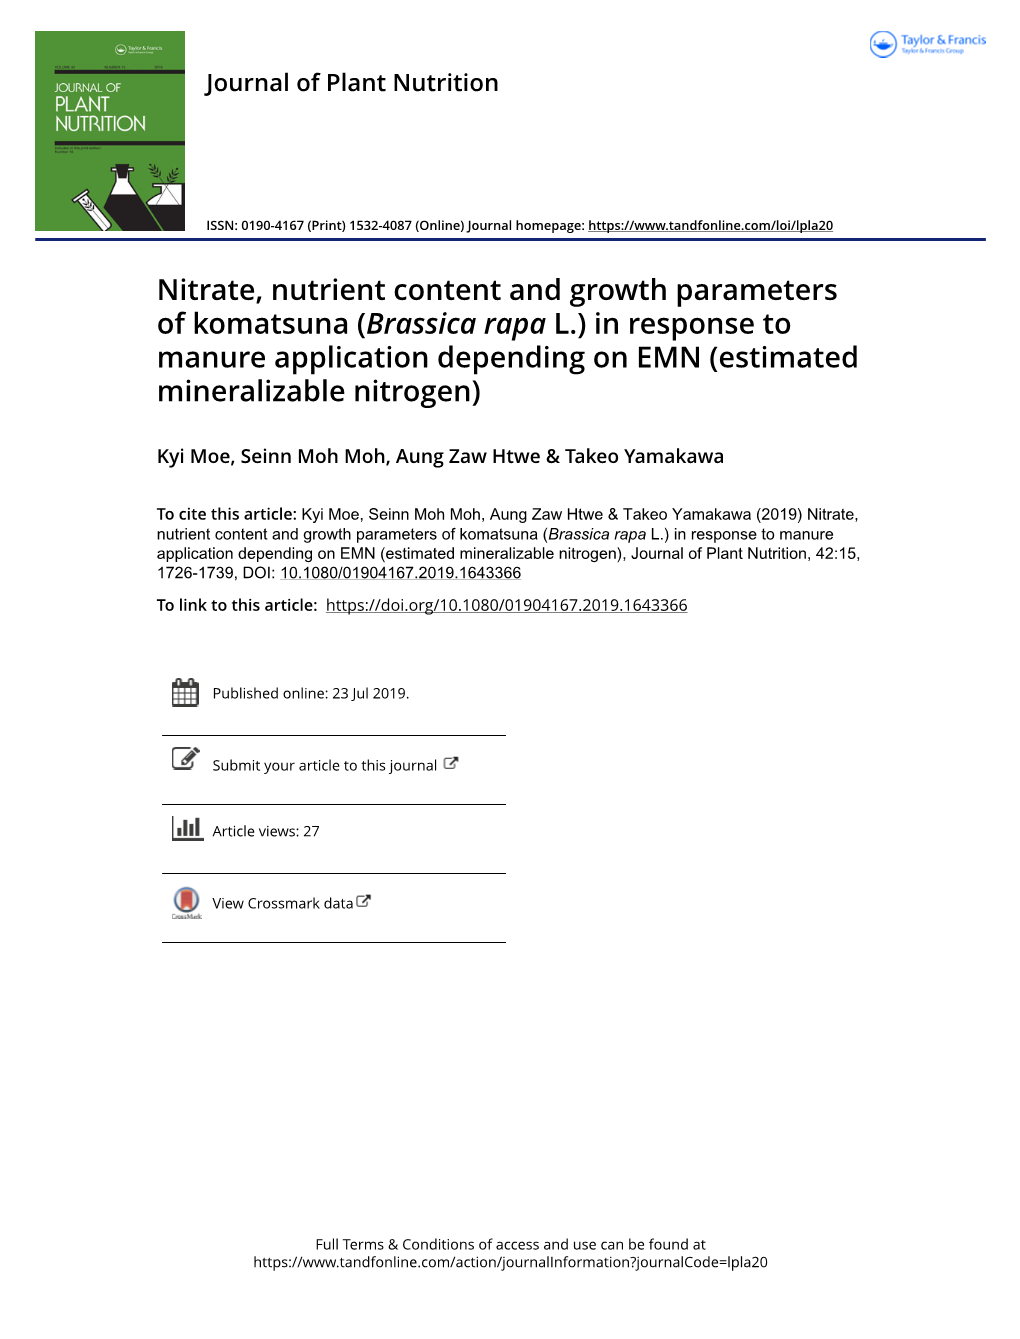 Nitrate, Nutrient Content and Growth Parameters of Komatsuna (Brassica Rapa L.) in Response to Manure Application Depending on EMN (Estimated Mineralizable Nitrogen)